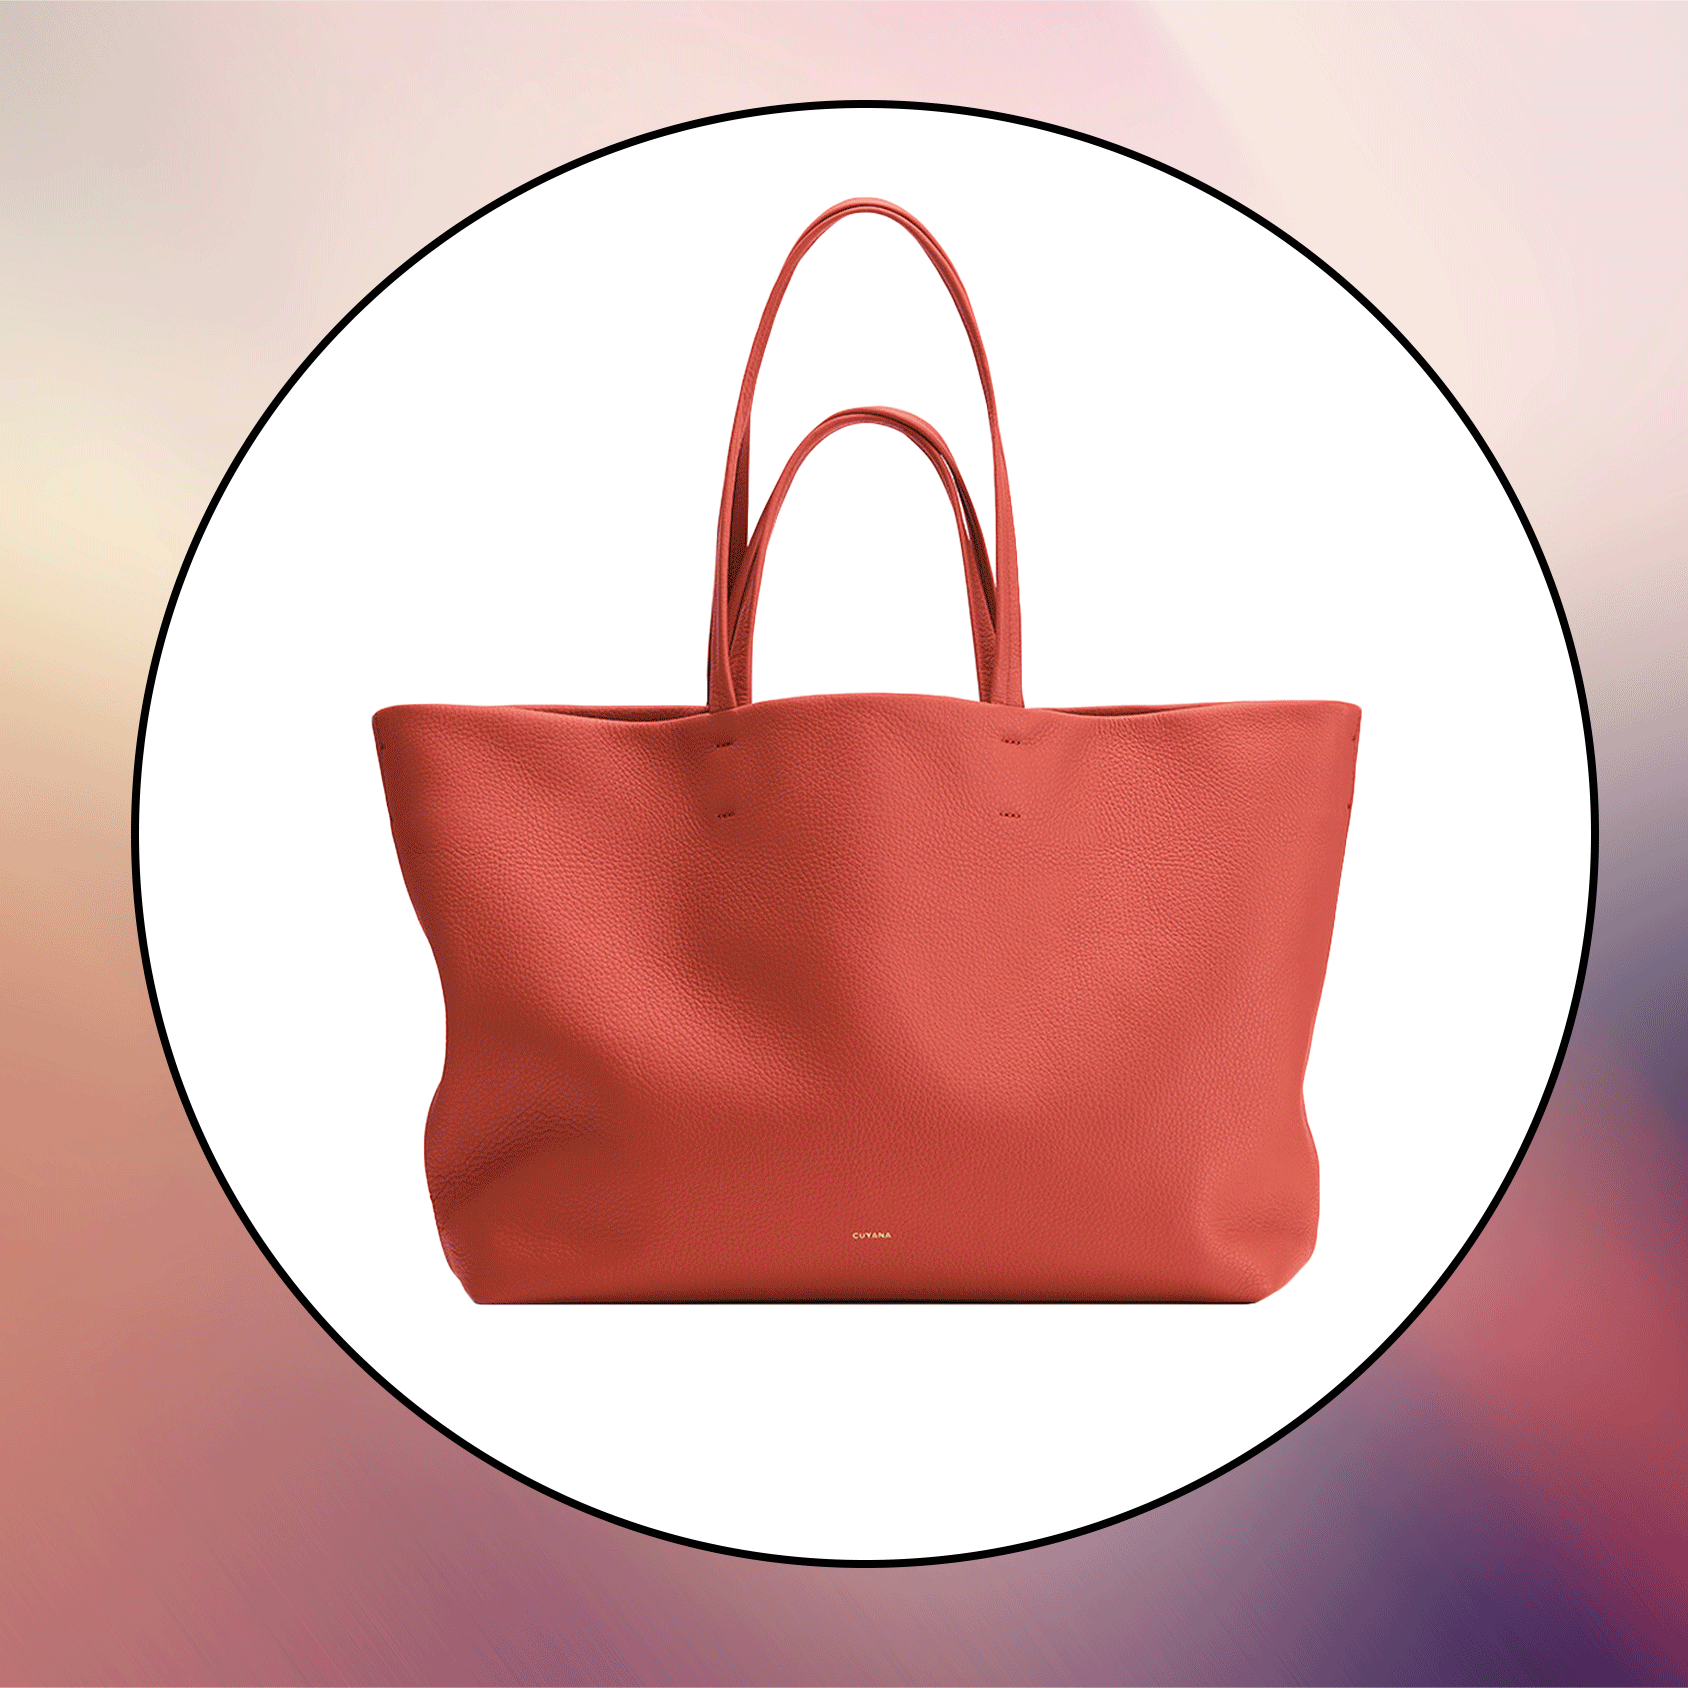 some of the best laptop bags, including Longchamp; Madewell; Freja; Cuyana